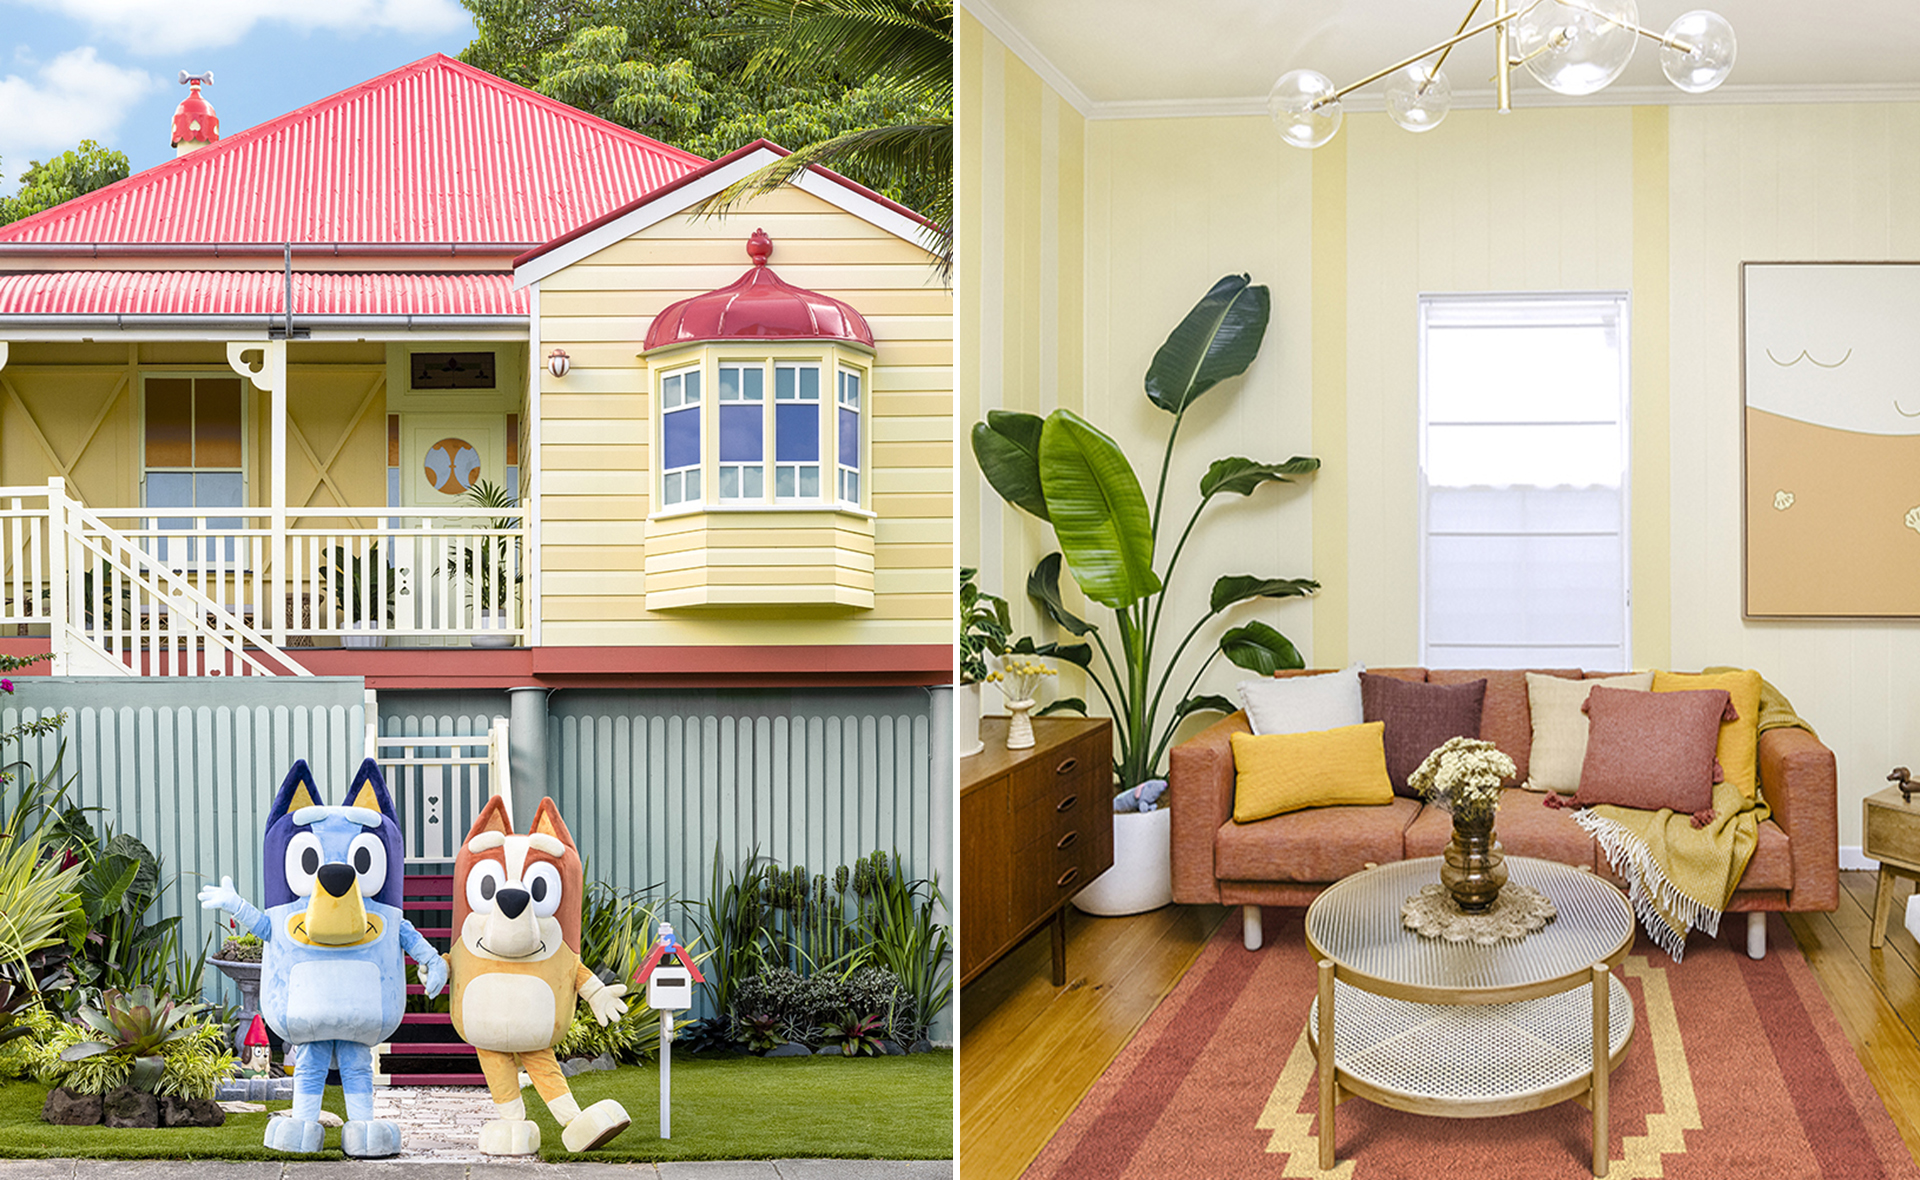 Live like Bluey: The iconic Heeler home has been recreated in Brisbane and listed on Airbnb